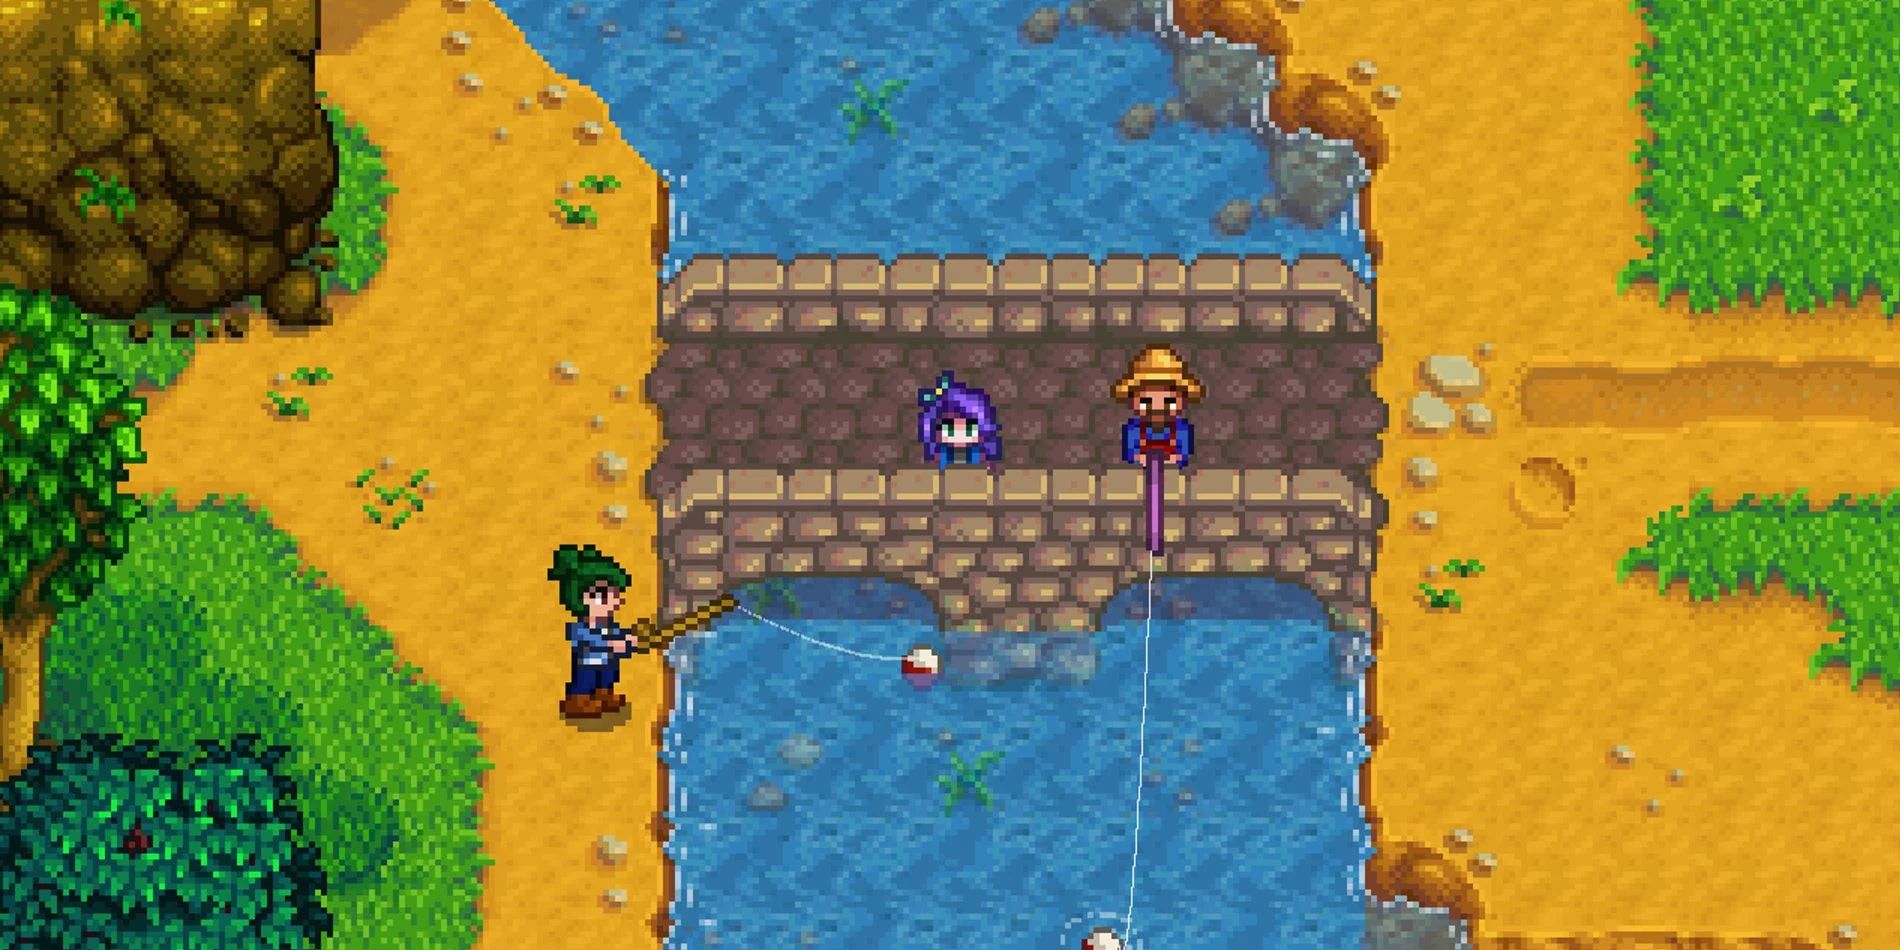 Stardew Valleys Legendary Fish (& Where They Are Caught)